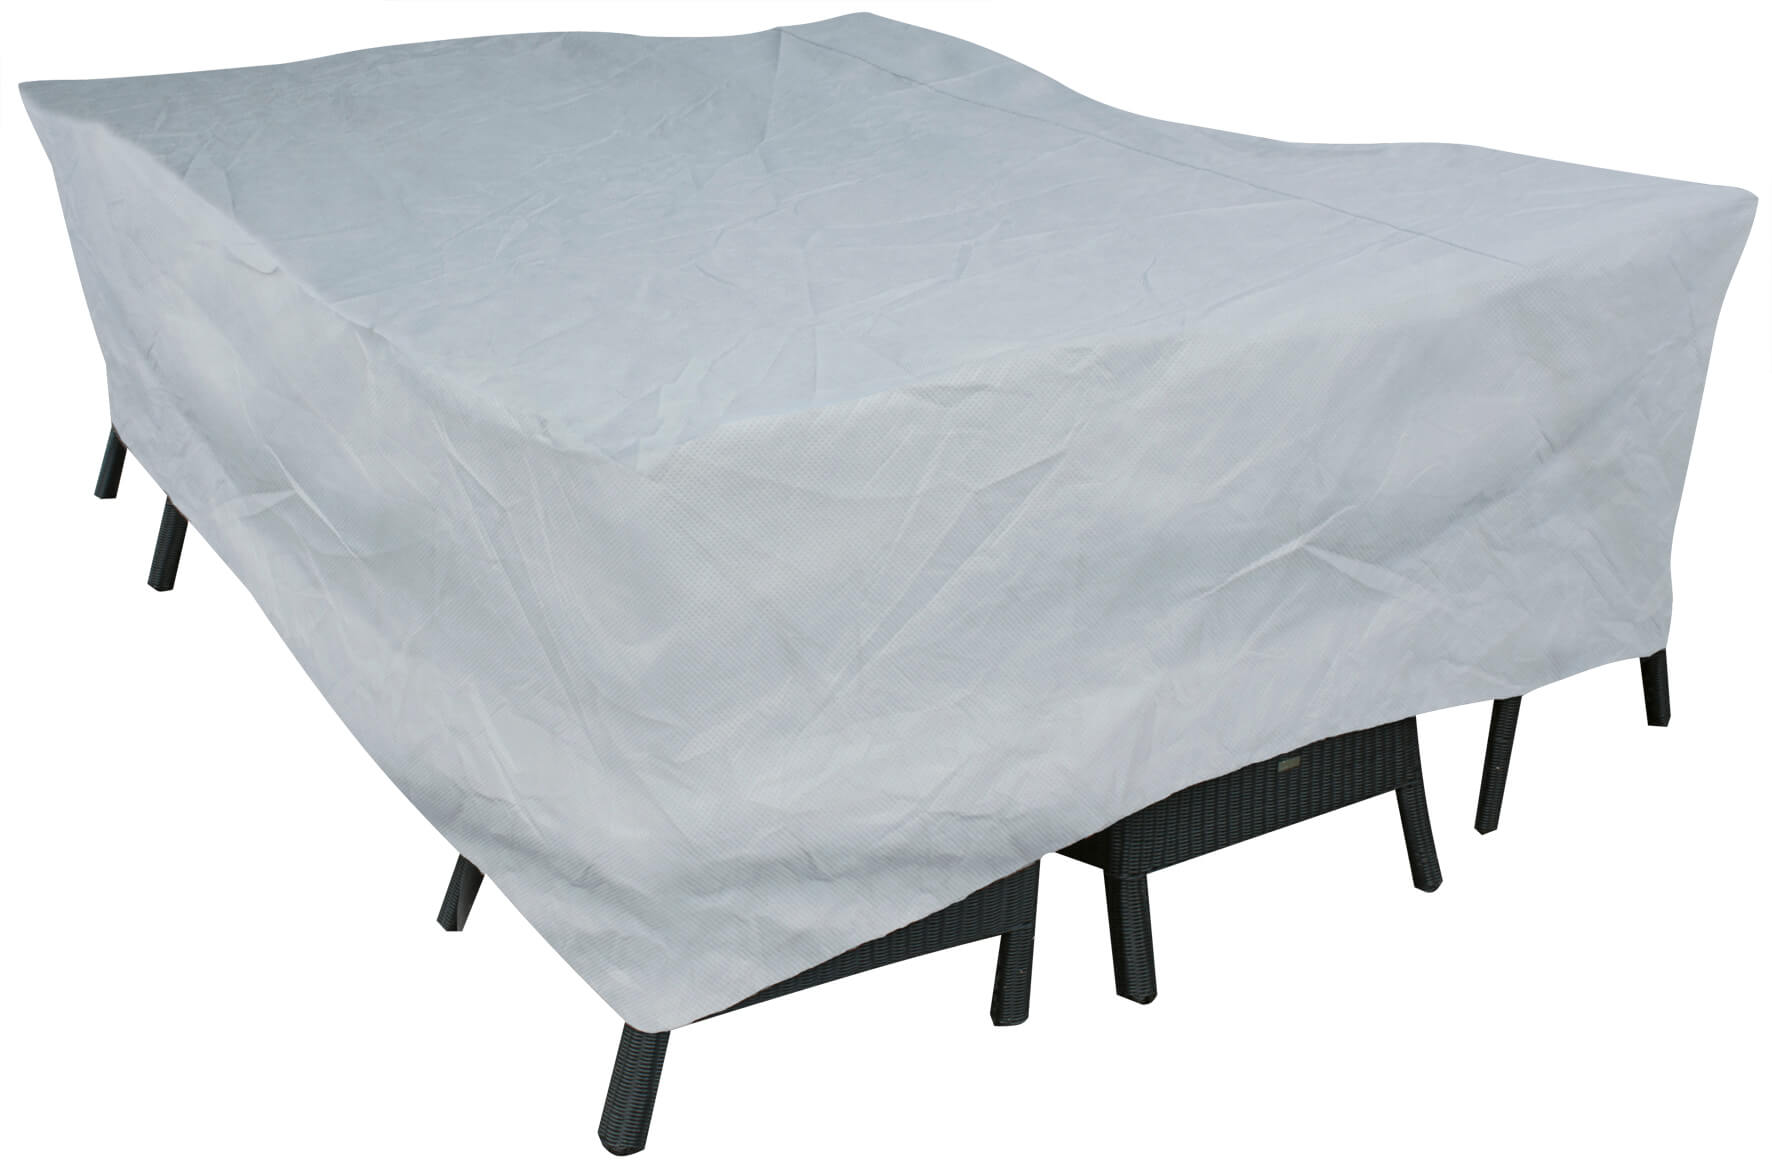 Weather cover for rectangular furniture set 140 x 120 H: 100 cm